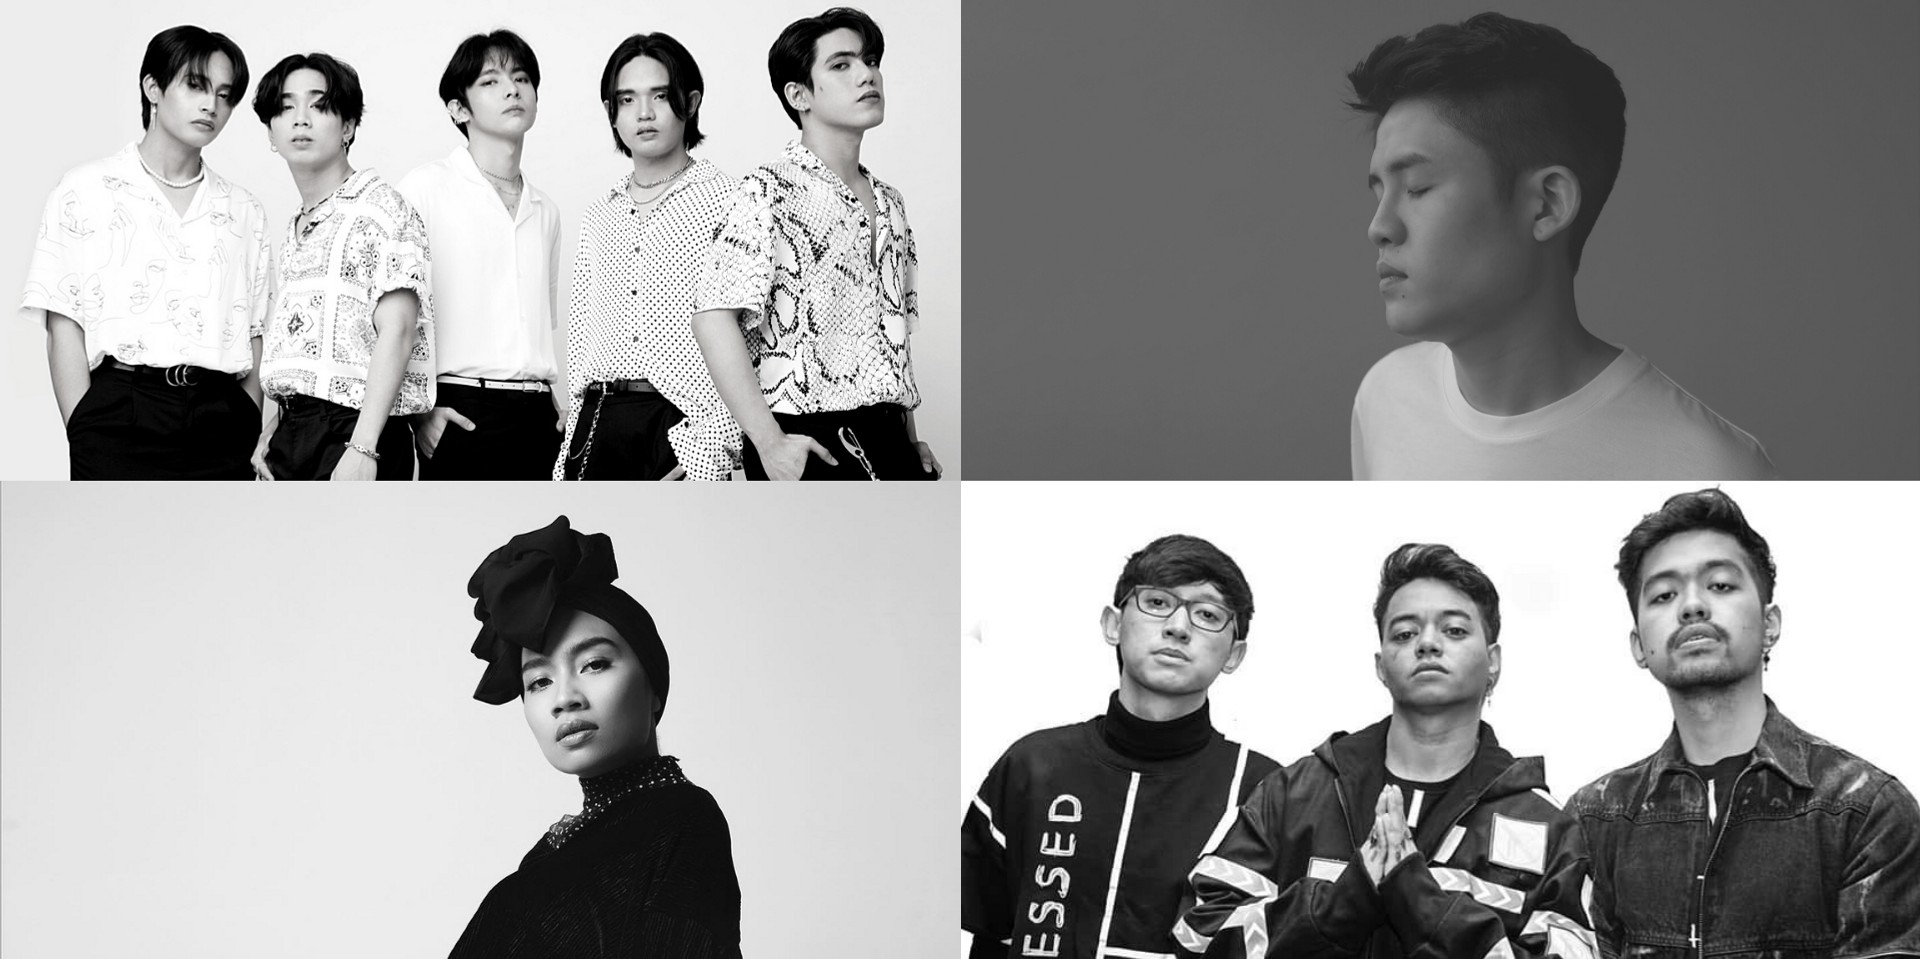 Apple Music unveils 100 best songs in Indonesia, the Philippines, Singapore, Malaysia, and Thailand – SB19, Weird Genius, Gentle Bones, Yuna, and more